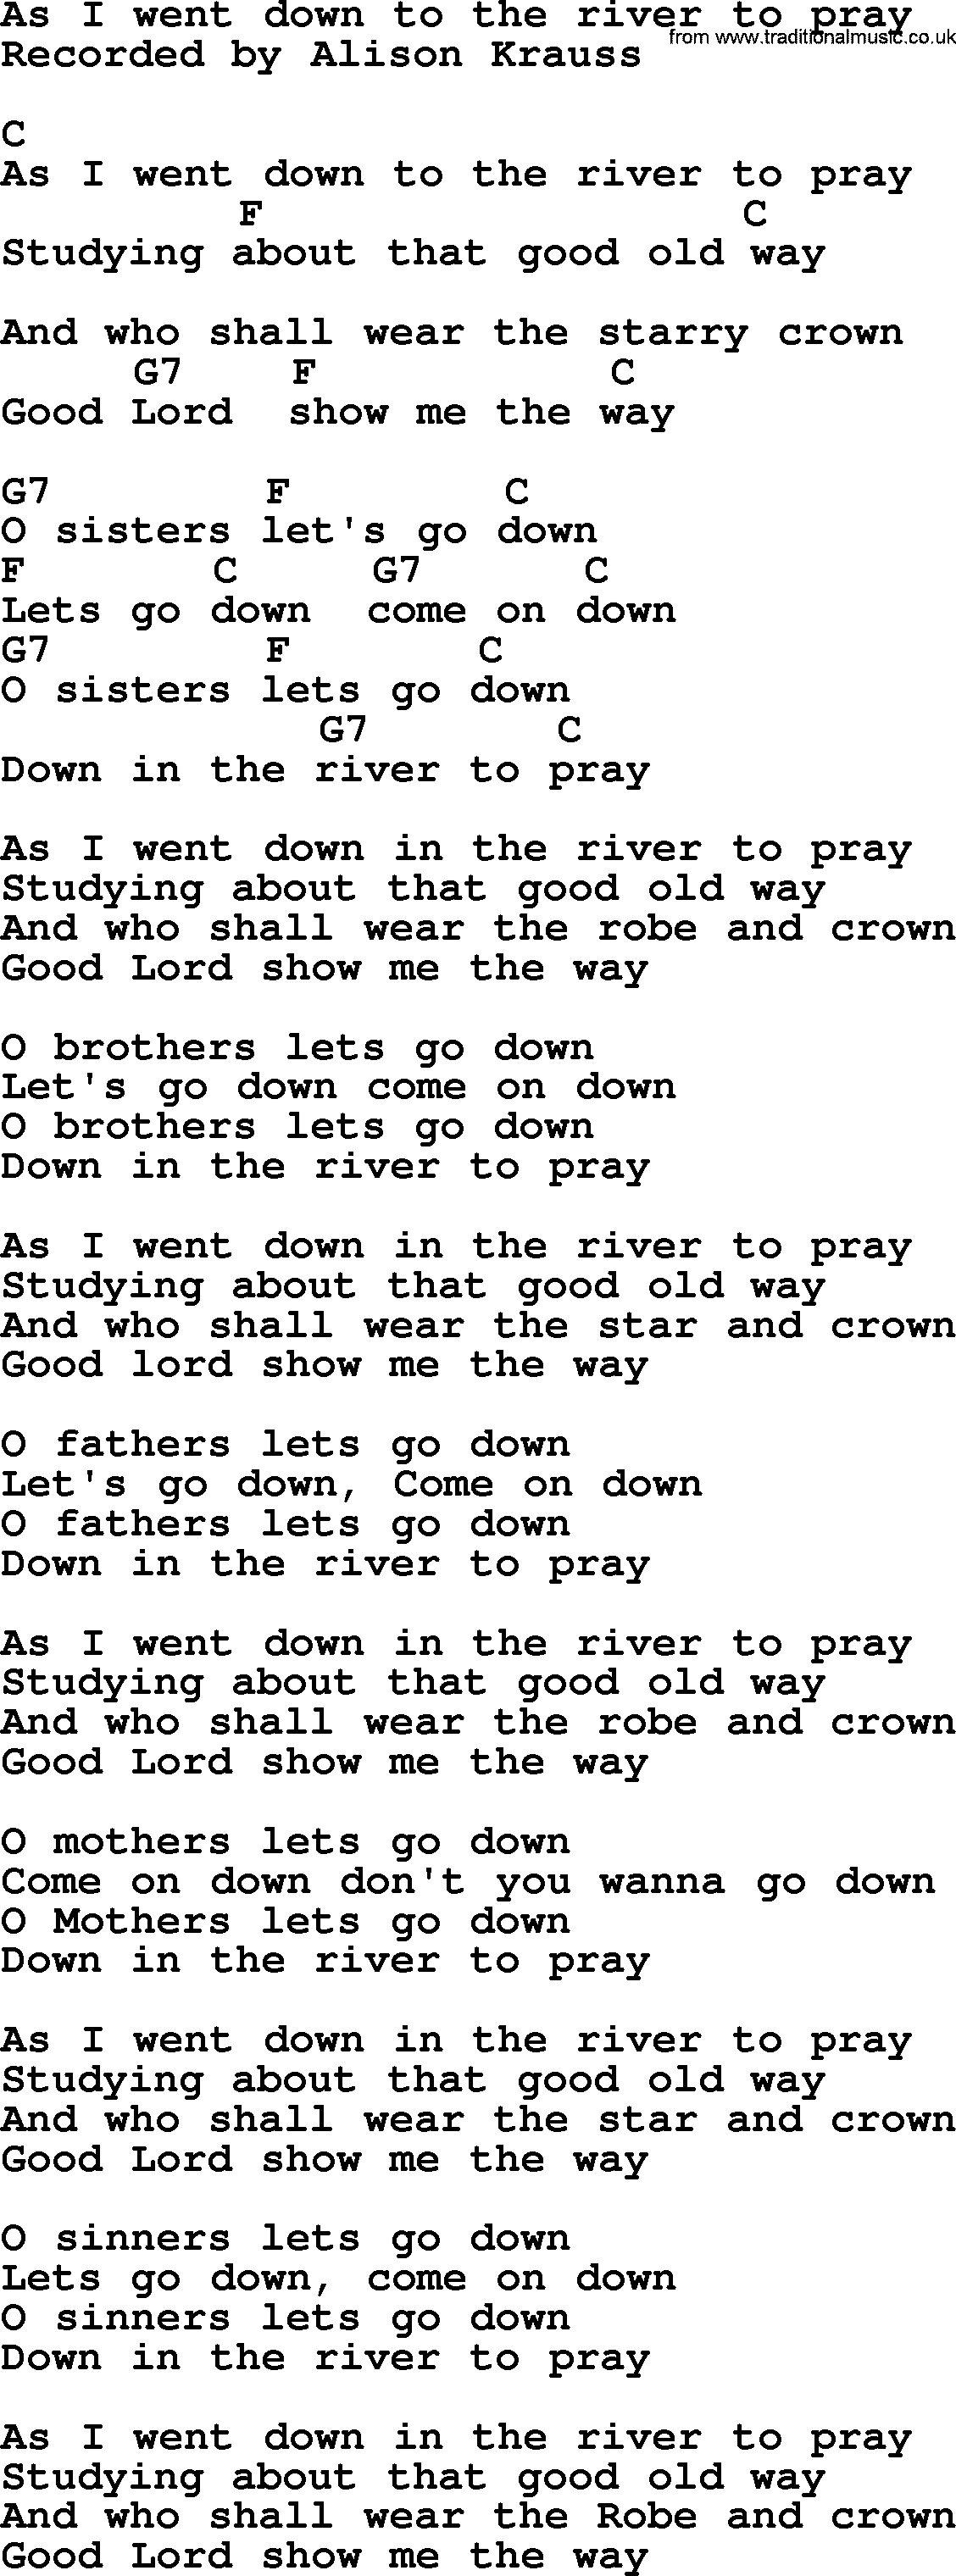 Bluegrass song: As I Went Down To The River To Pray, lyrics and chords